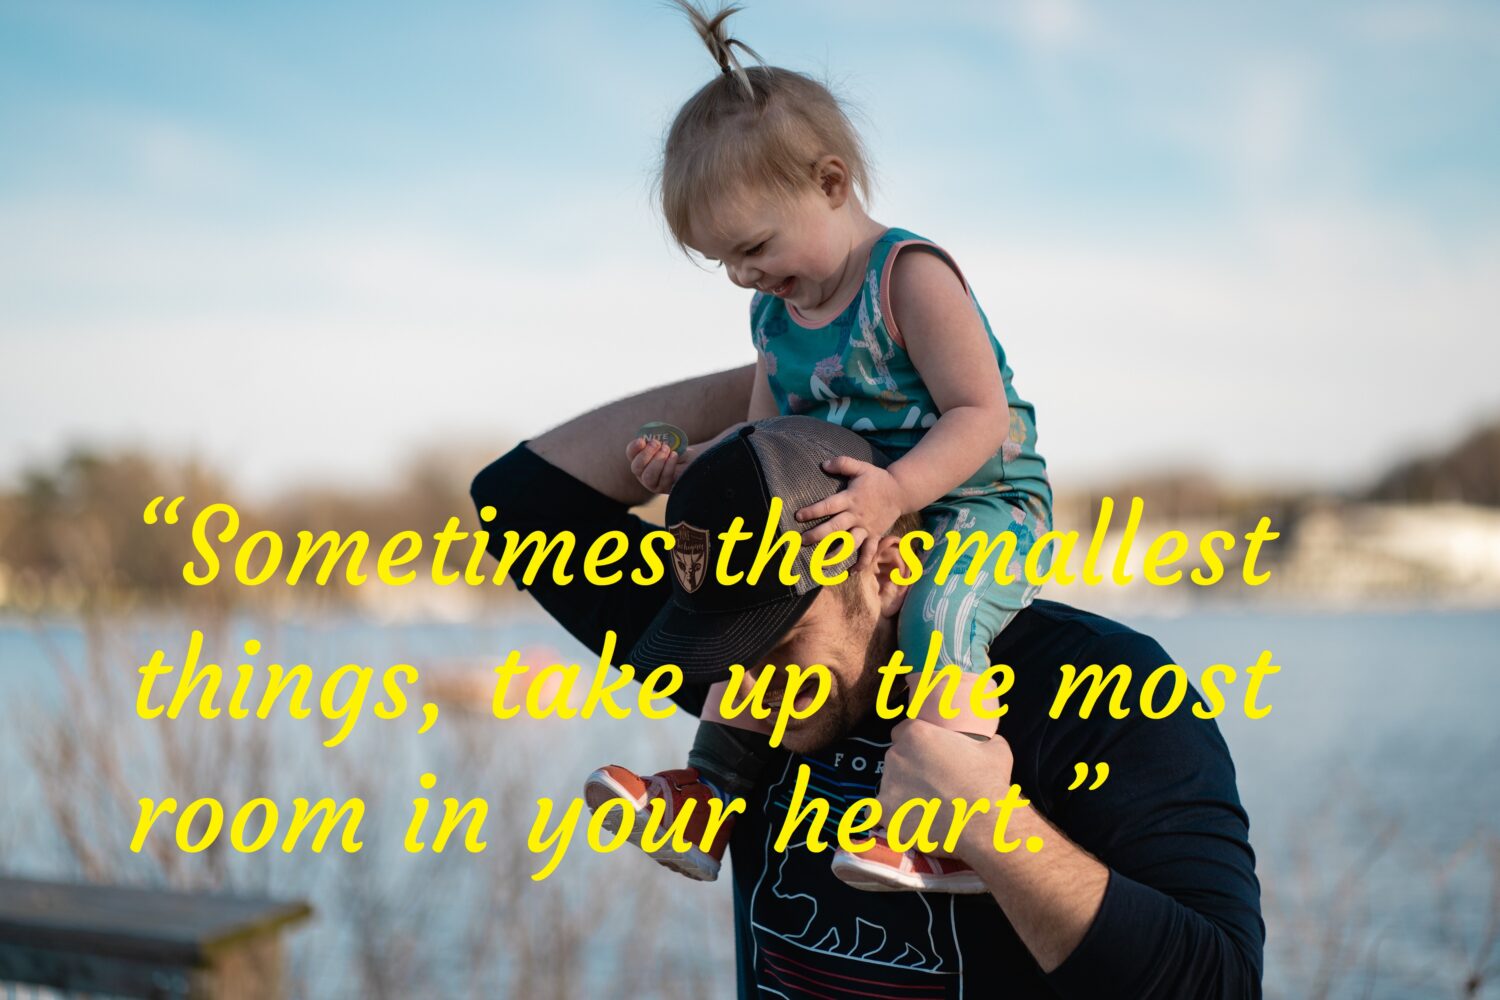 Girl sitting on fathers shoulder, Daughters quotes.